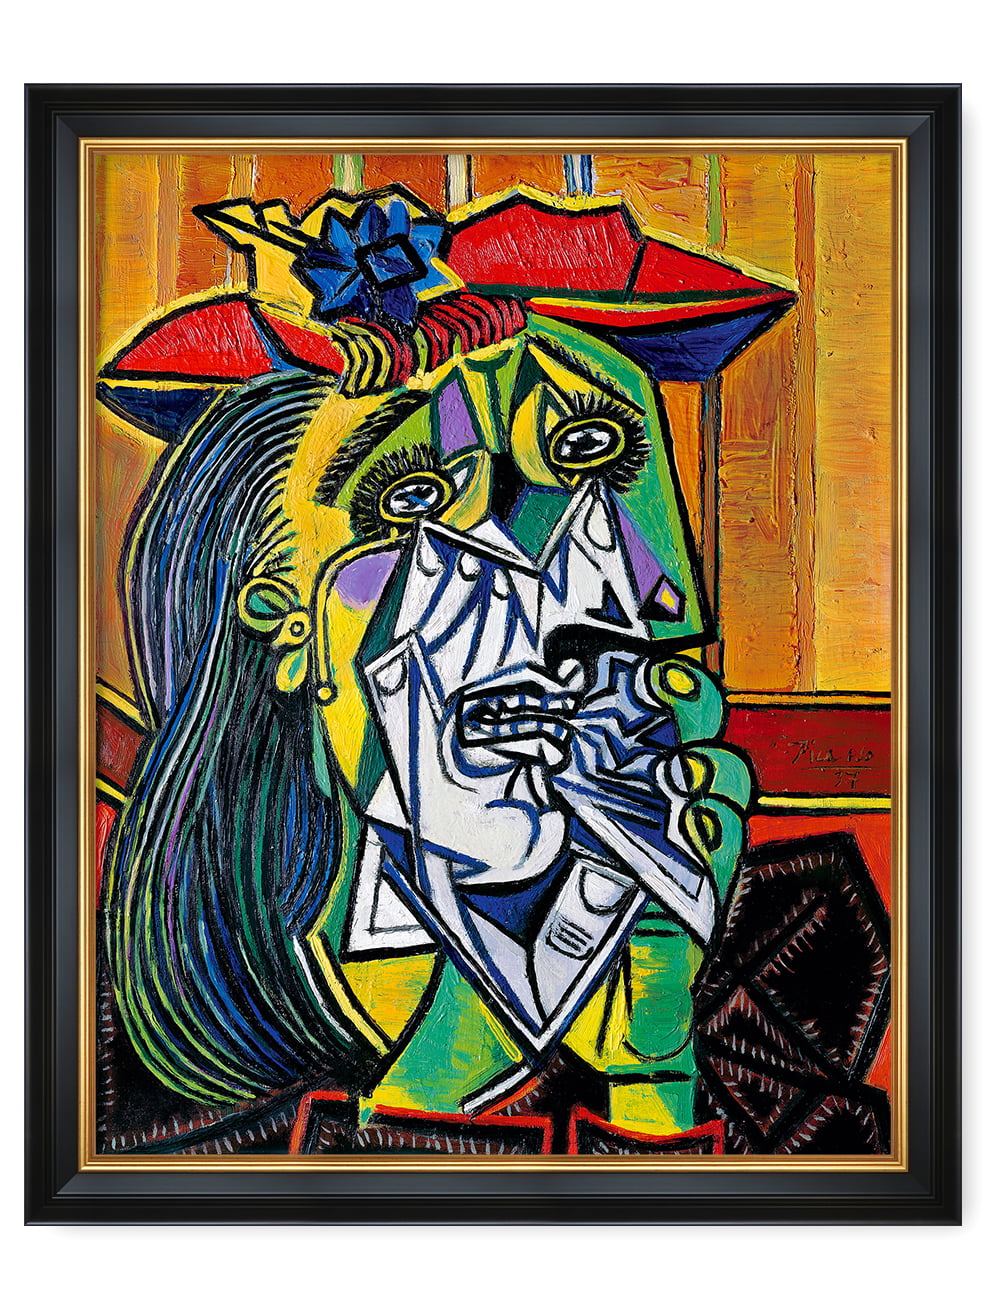 DECORARTS - Nude, Green Leaves and Bust by Pablo Picasso, Oversize Canvas  Wall Art Giclee Prints on Acid Free Cotton Canvas for Home Decor W 32 x H  40 